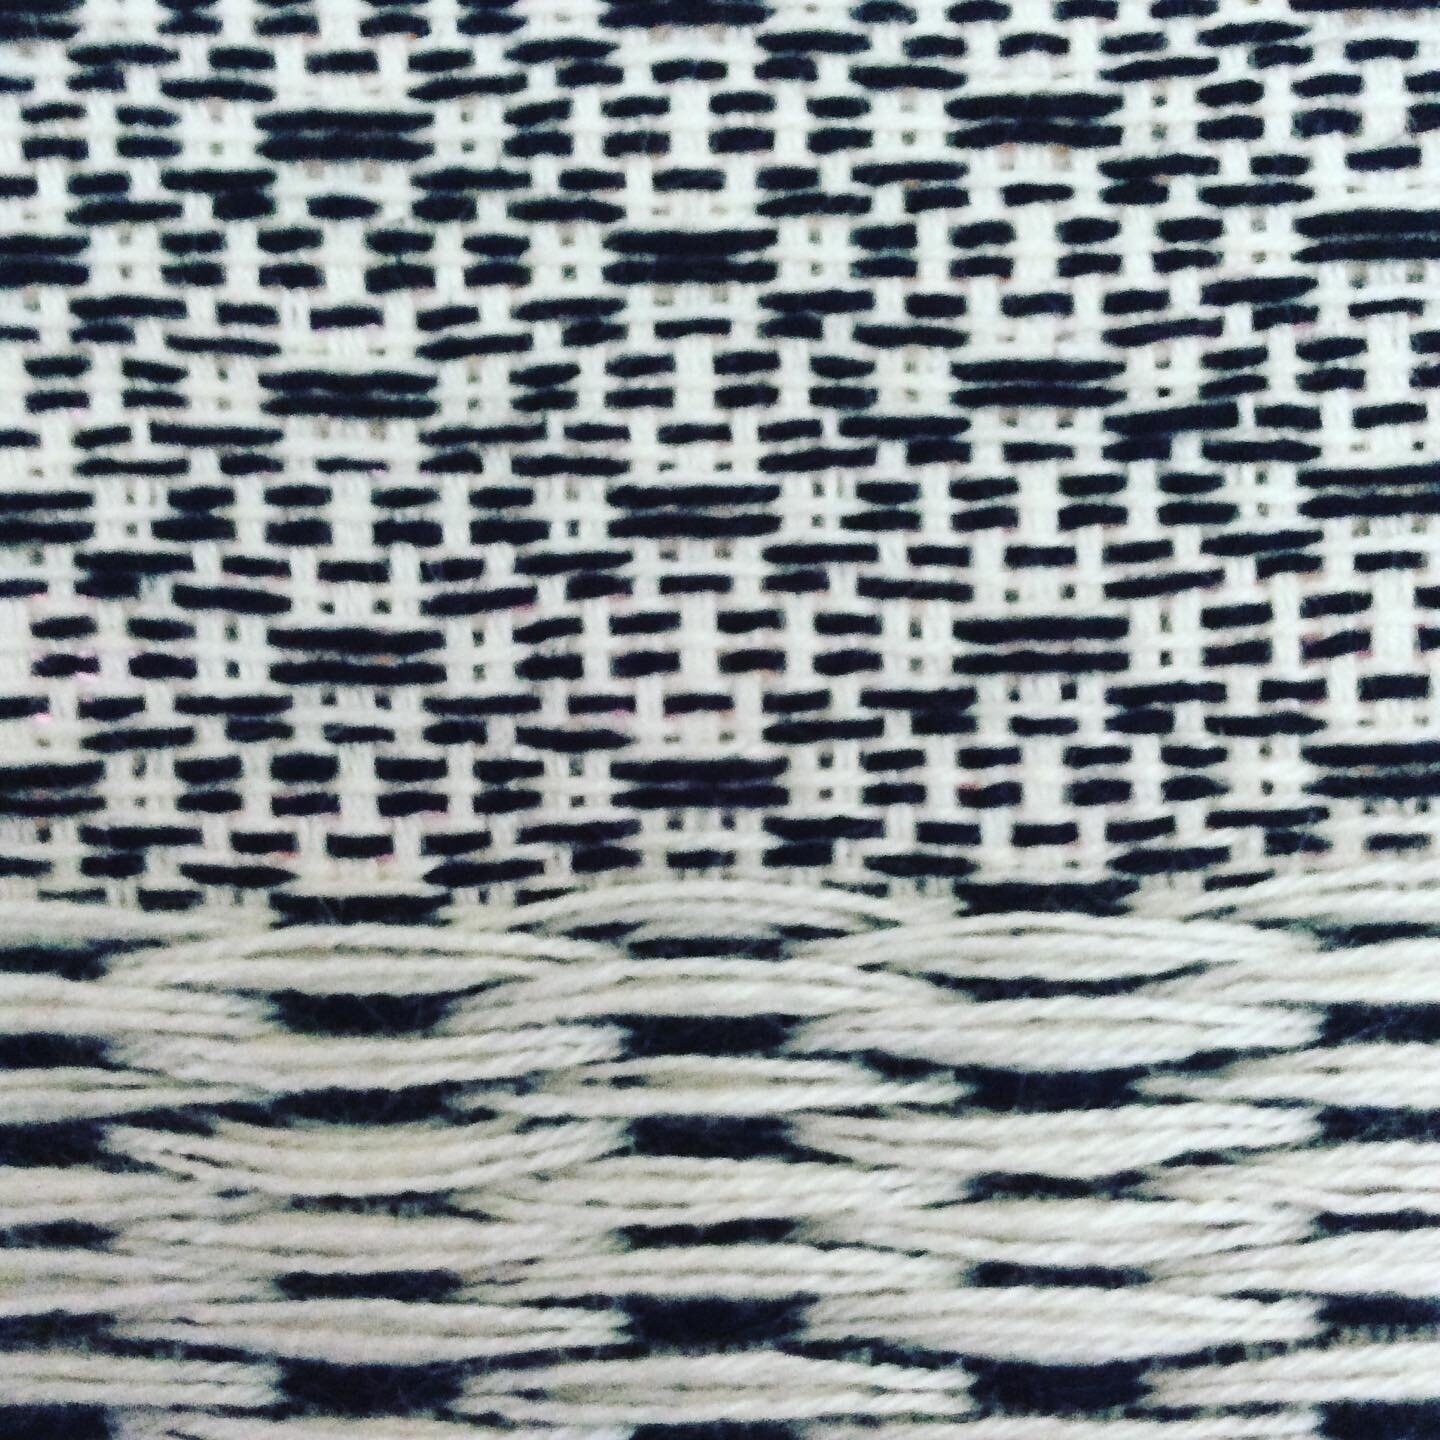 Weekend weaving. I did a little bit yesterday and a little bit today. Decided I want to experiment with black and white to match the warp. It&rsquo;s slow progress because I am slow this weekend. The fatigue is real! What I really want to try is the 